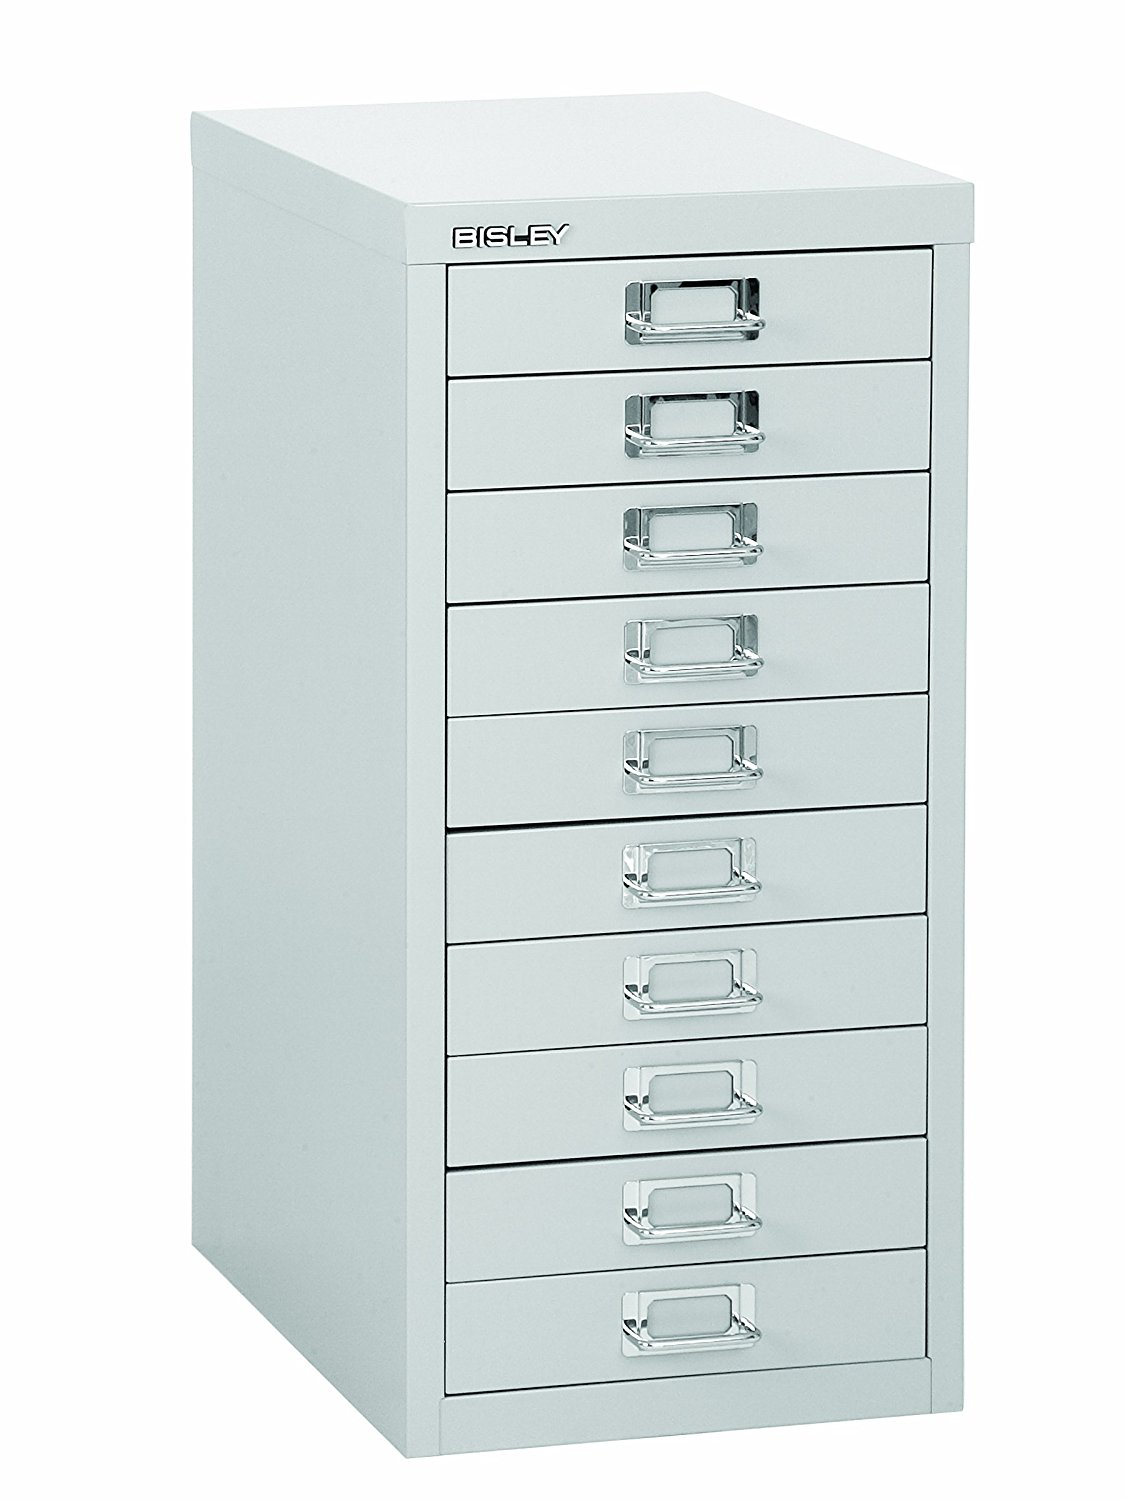 Bisley 10 Drawer A4 Cabinet Grey H2910nl 073 The Office Centre regarding measurements 1125 X 1500